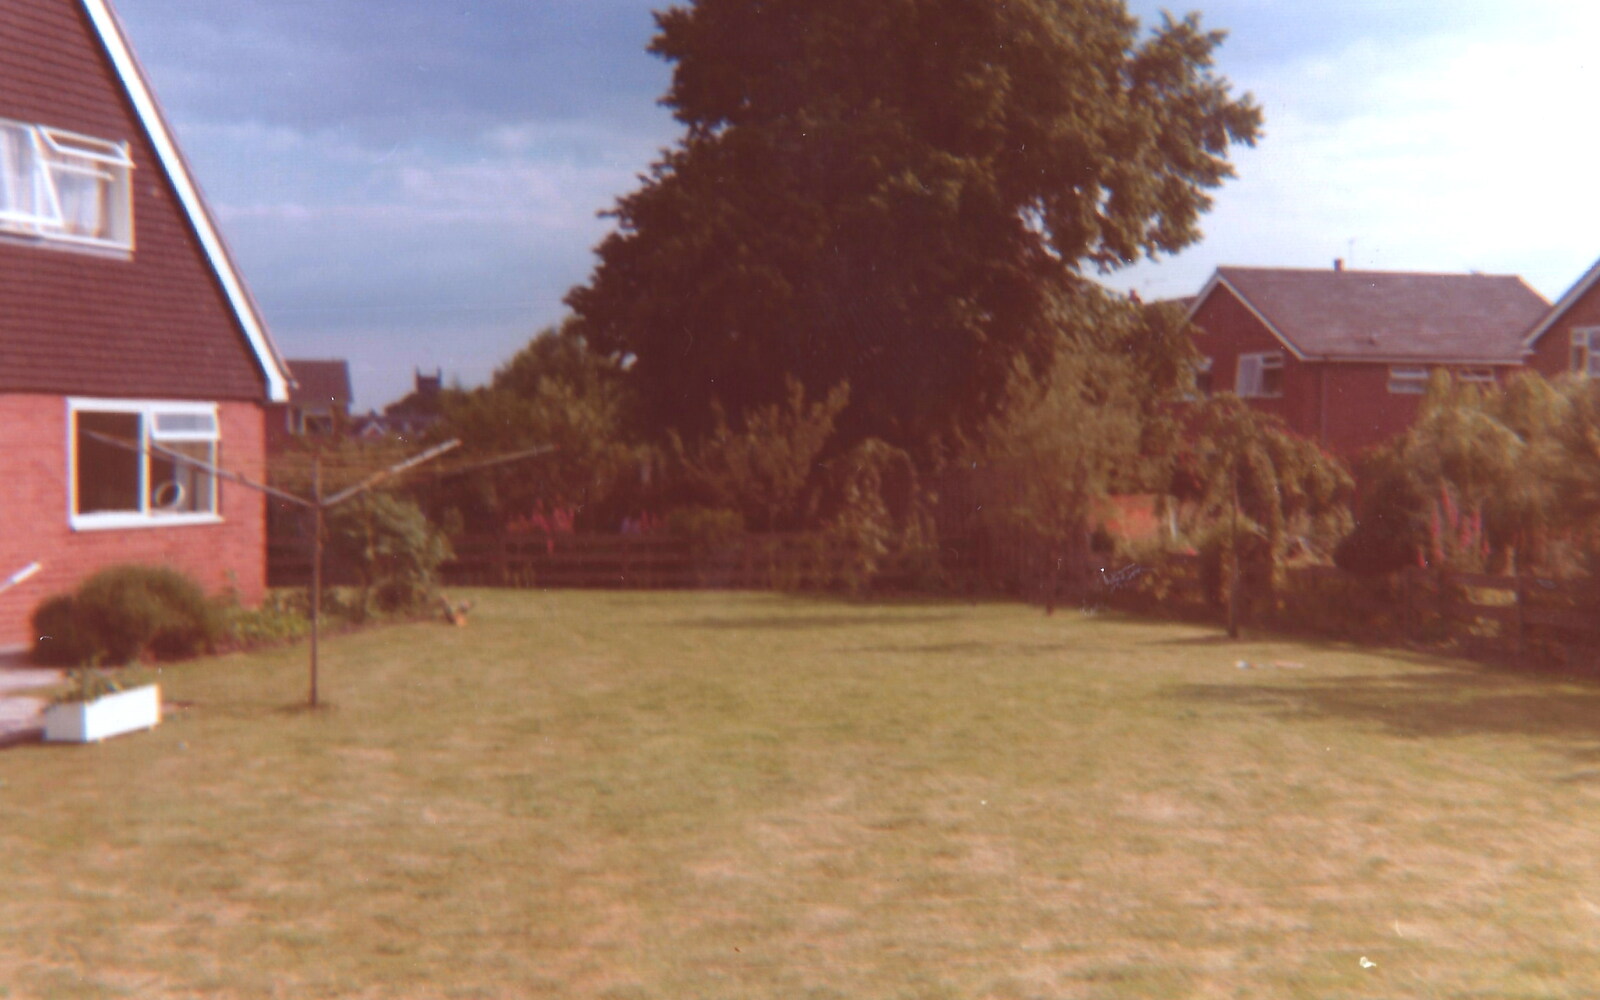 Family History: Birtle's Close, Sandbach, Cheshire - 24th January 2020: Another view of the back garden